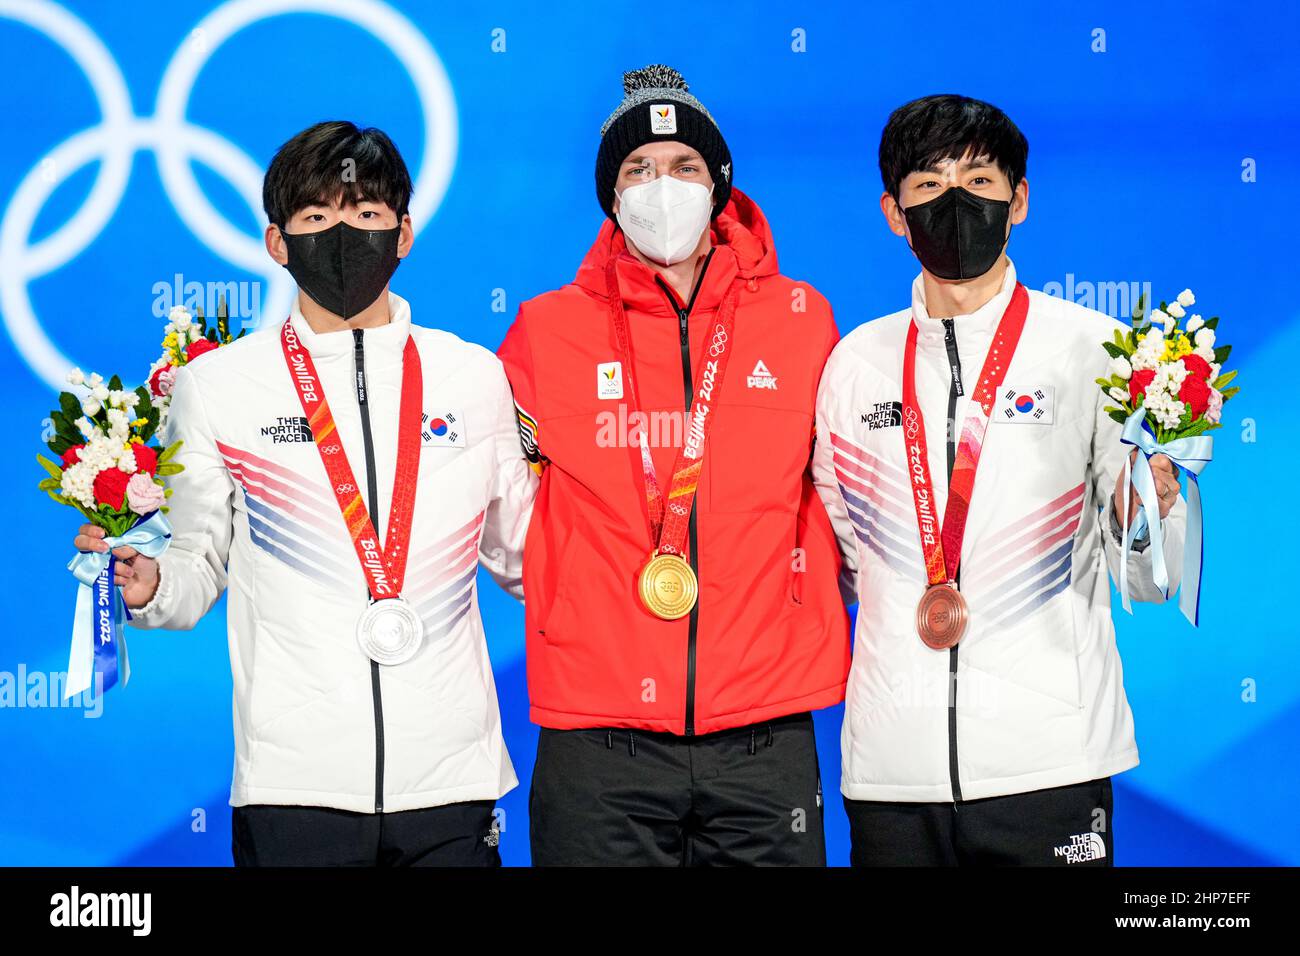 Beijing, China. 19th Feb 2021. BEIJING, CHINA - FEBRUARY 19: Jae Won Chung of Korea winner of the silver medal, Bart Swings of Belgium winner of the gold medal, Seung Hoon Lee of Korea winner of the brons medal of the Speed Skating Men's Mass Start - Medal Ceremony during the Beijing 2022 Olympic Games at the Medal Plaza on February 19, 2022 in Beijing, China (Photo by Douwe Bijlsma/Orange Pictures) NOCNSF Credit: Orange Pics BV/Alamy Live News Stock Photo